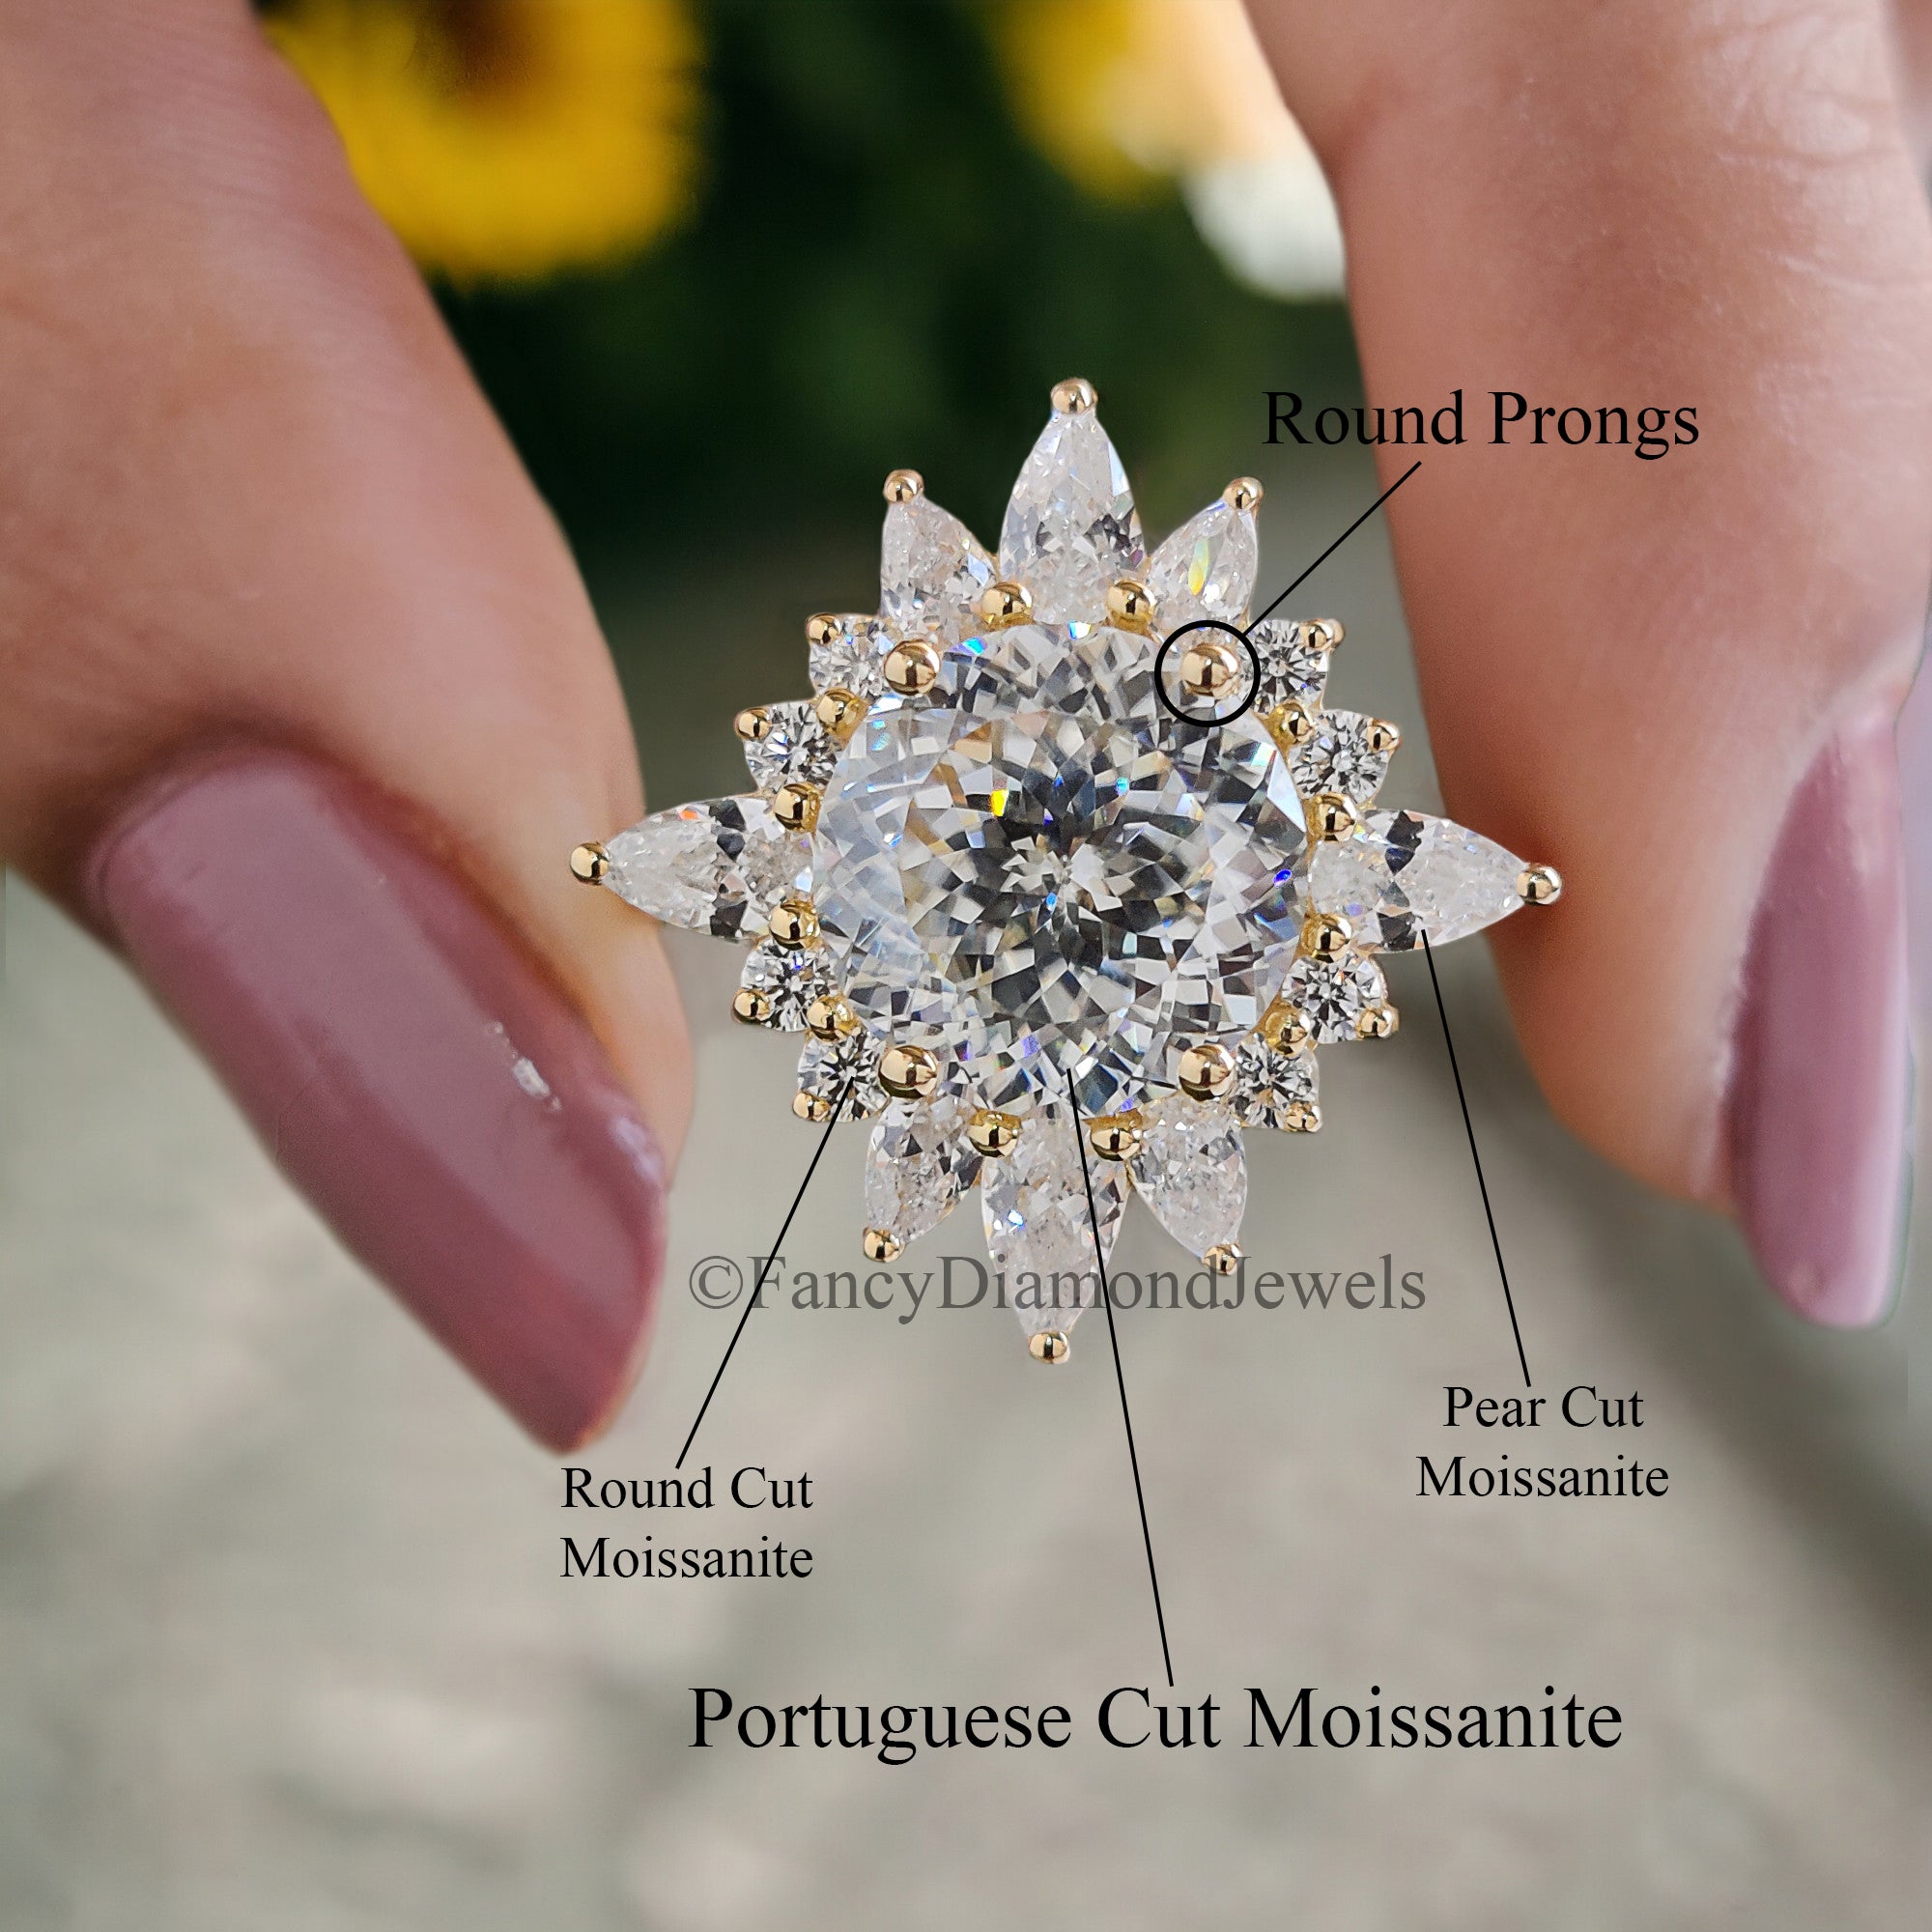 Vintage Engagement Ring 1920s Portuguese Cut Moissanite Yellow Gold Moissanite Aniversary Ring Handmade Jewelry by Fancy Diamond Jewels FD70